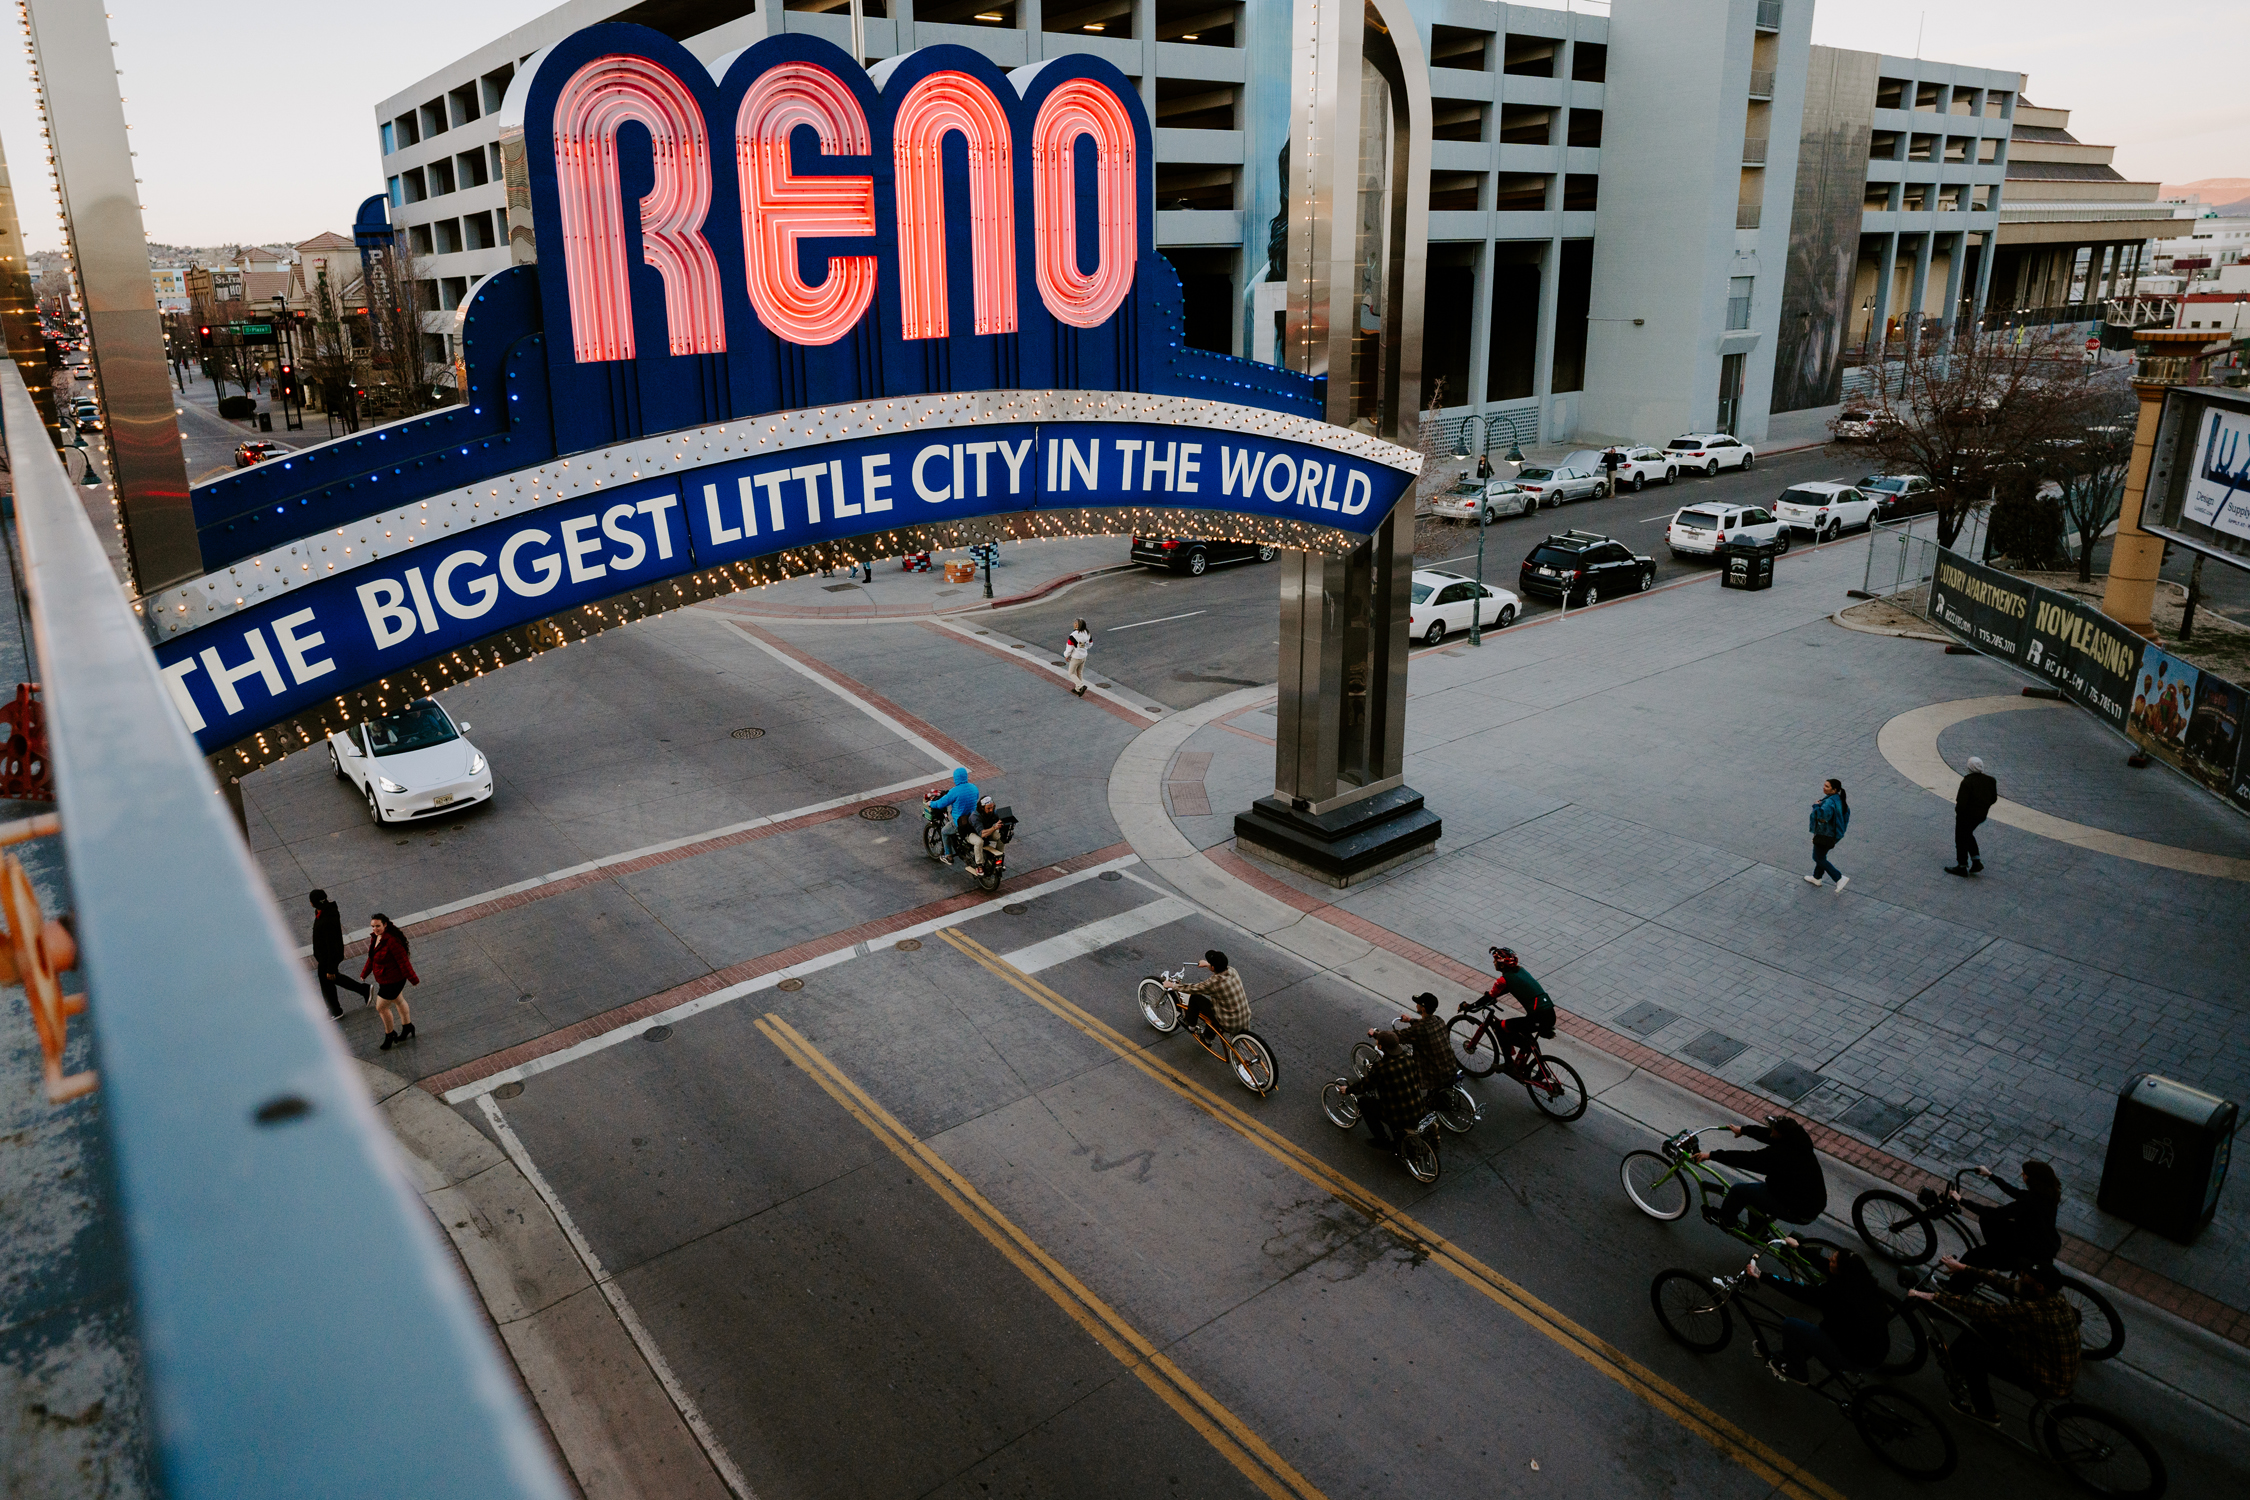 The Art of Grind riding downtown Reno